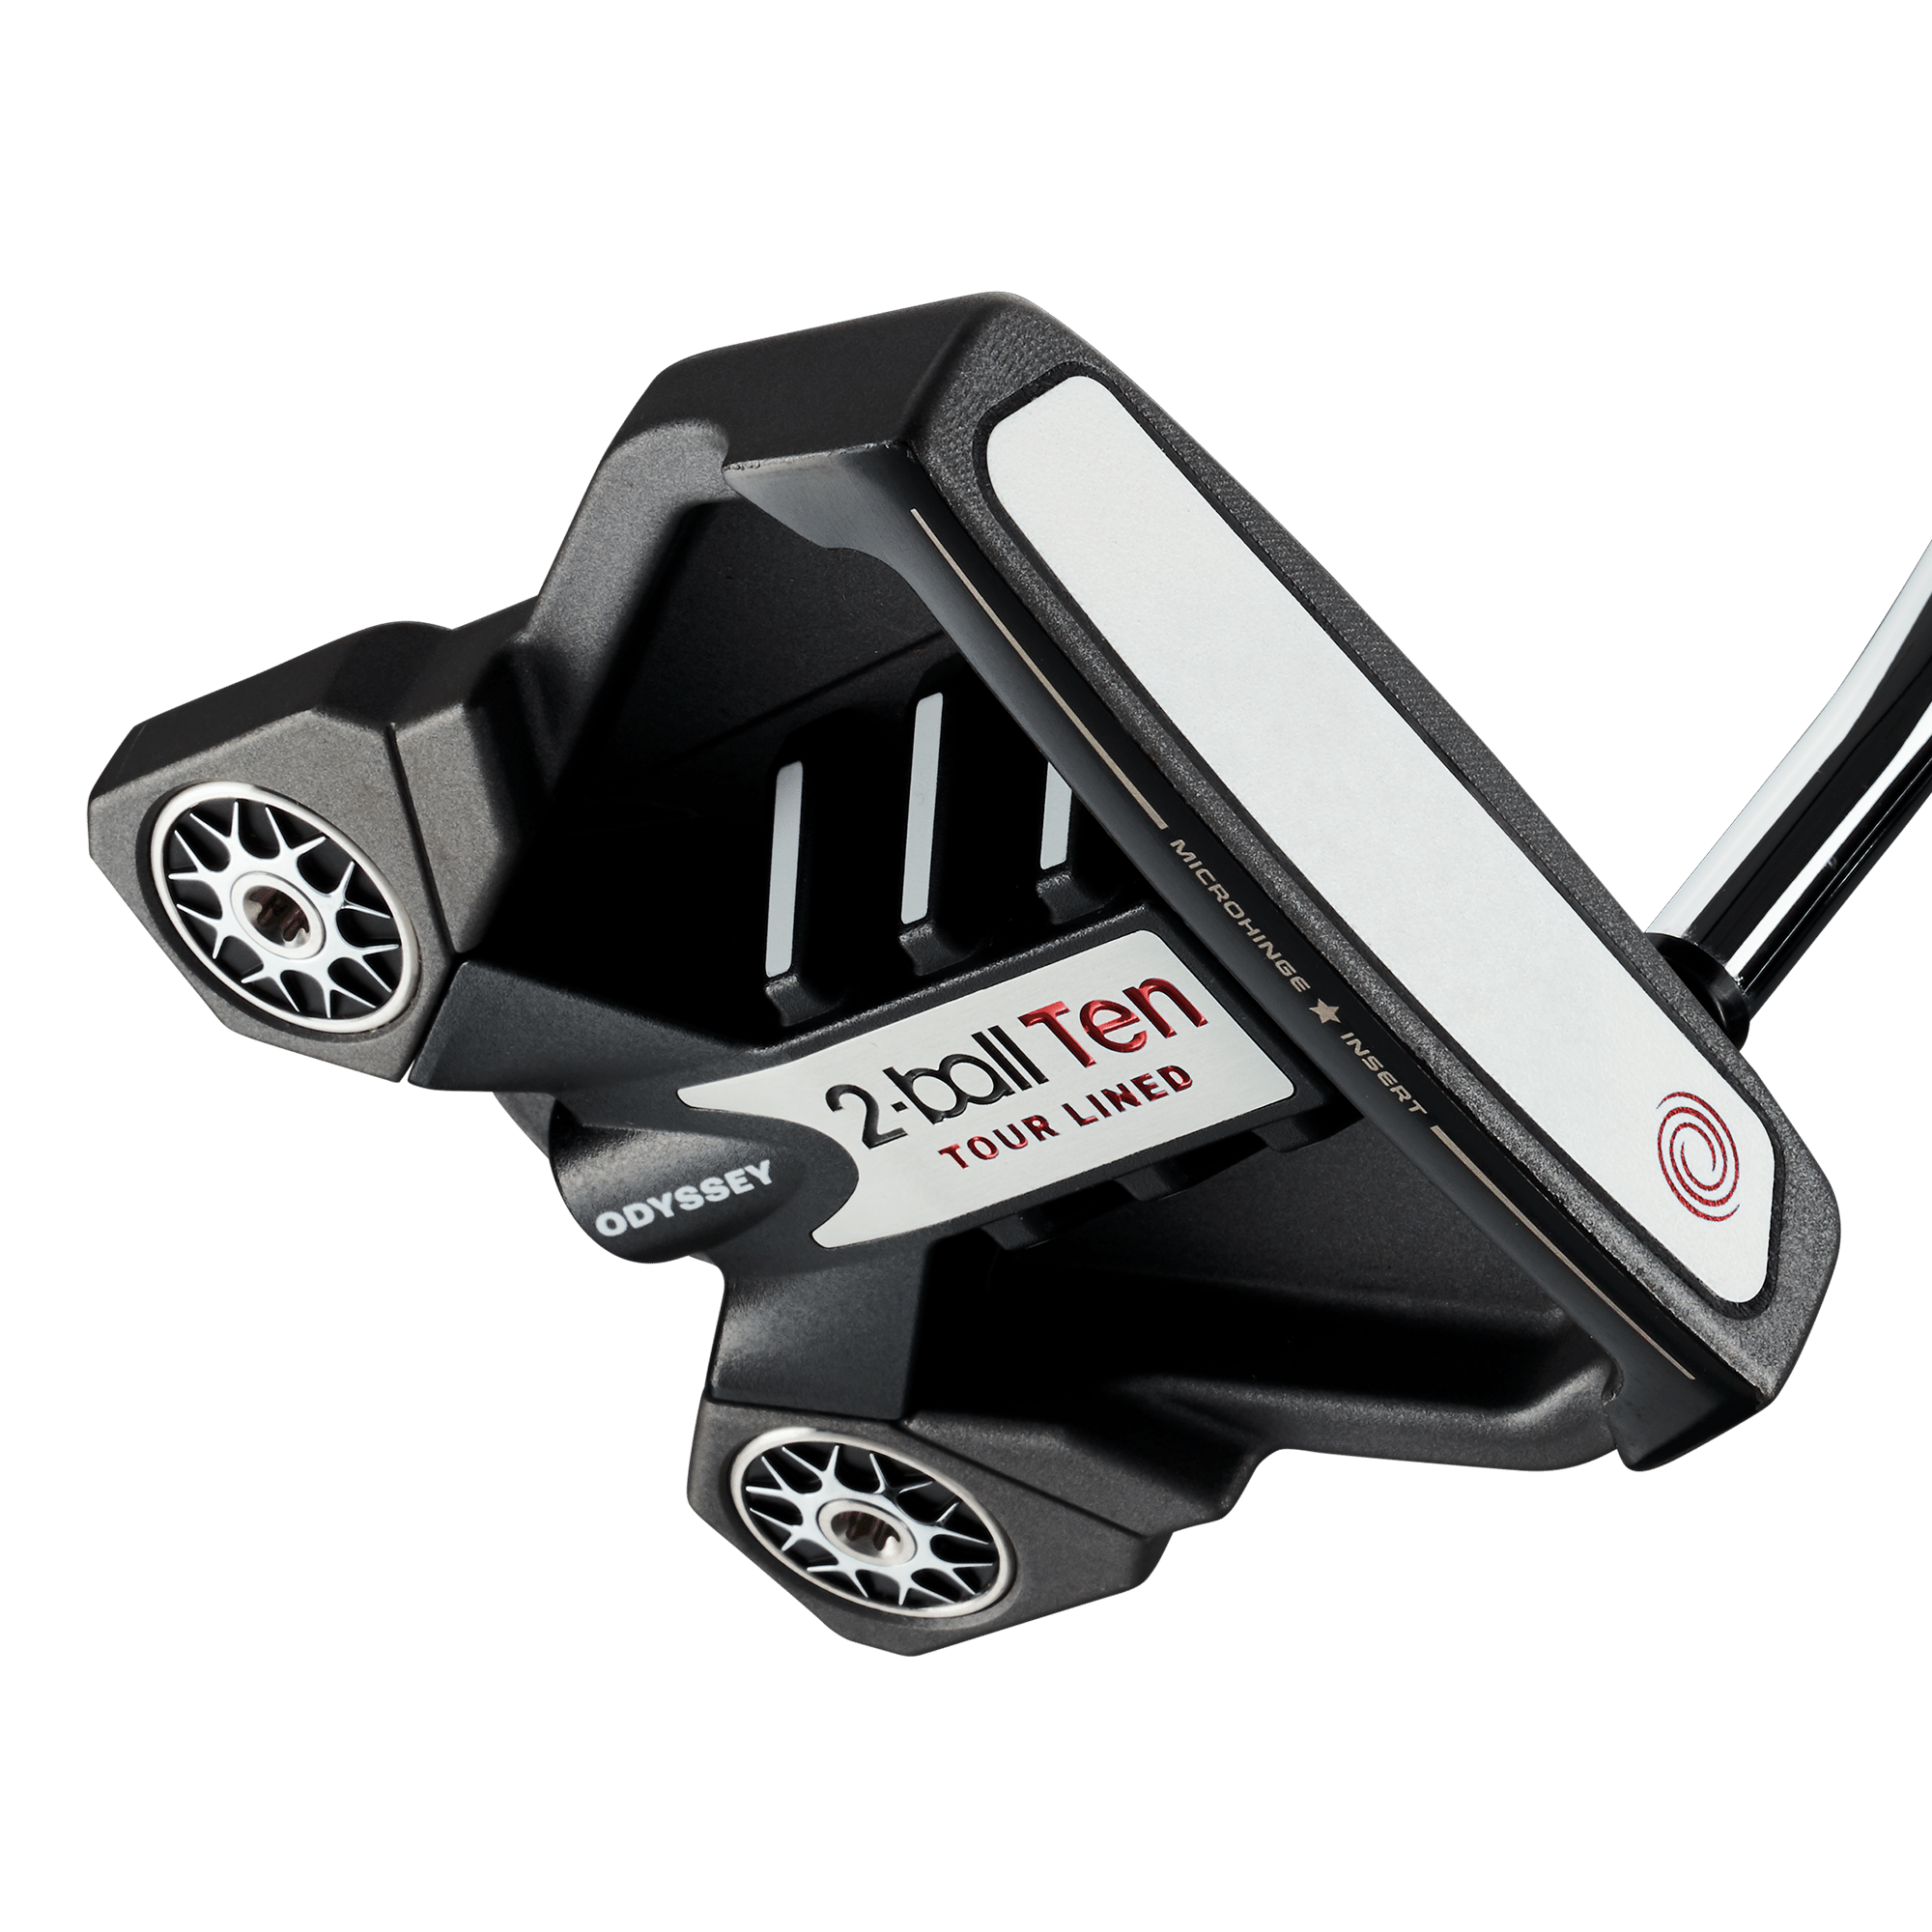 Odyssey 2-Ball Ten Tour Lined Putters | Callaway Golf Pre-Owned